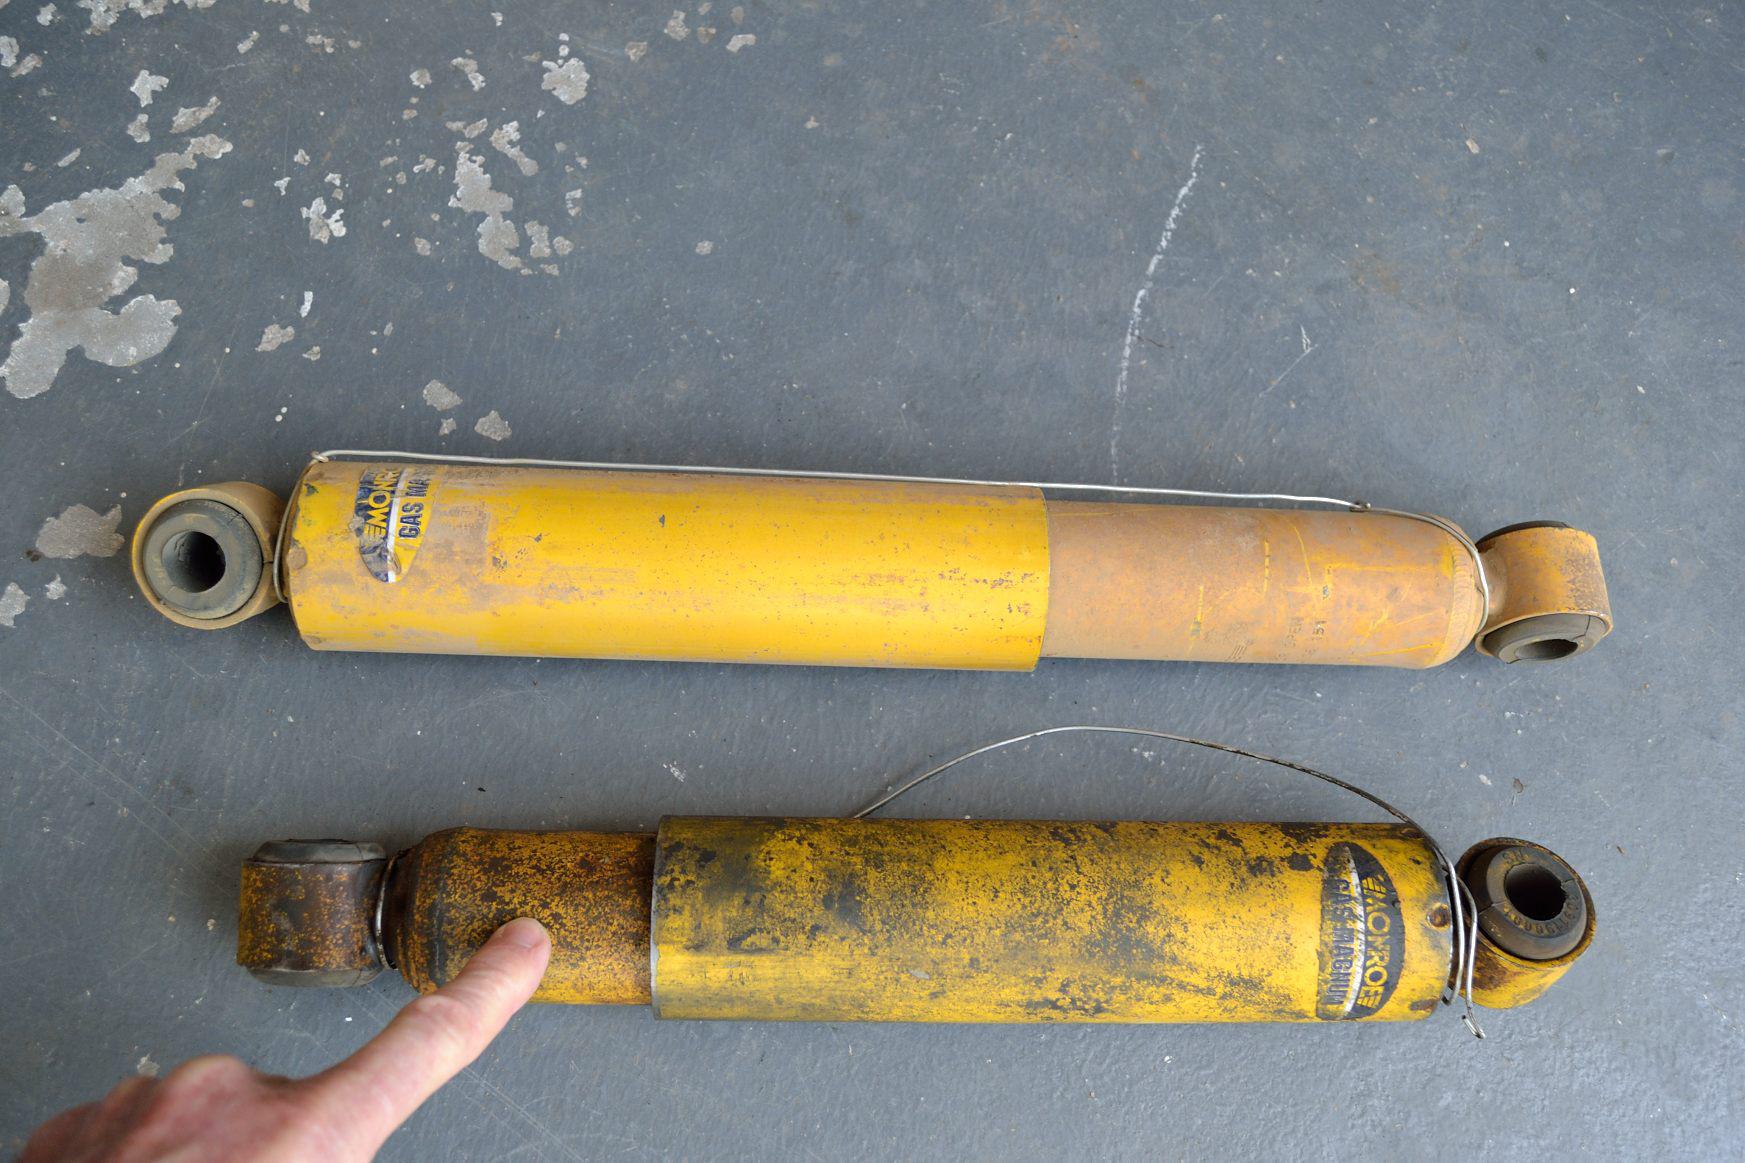 Normal dirt and problematic dirt (fingered) on a shock absorber.